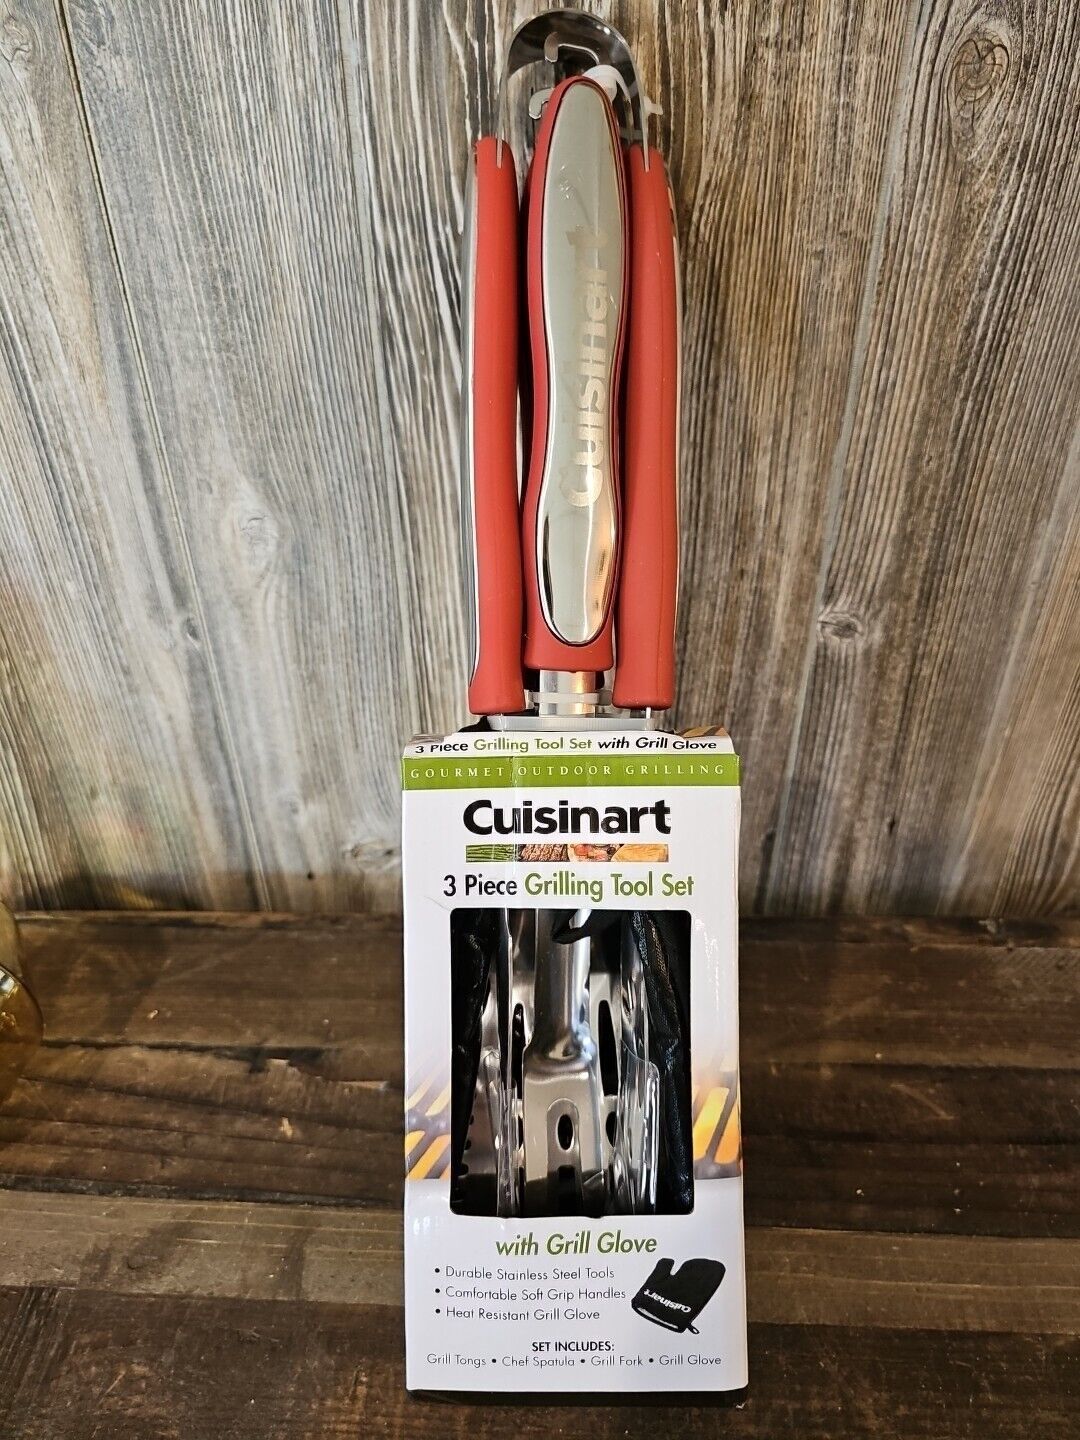 Brand New - Cuisinart Grilling Tool Set - 4 Piece 